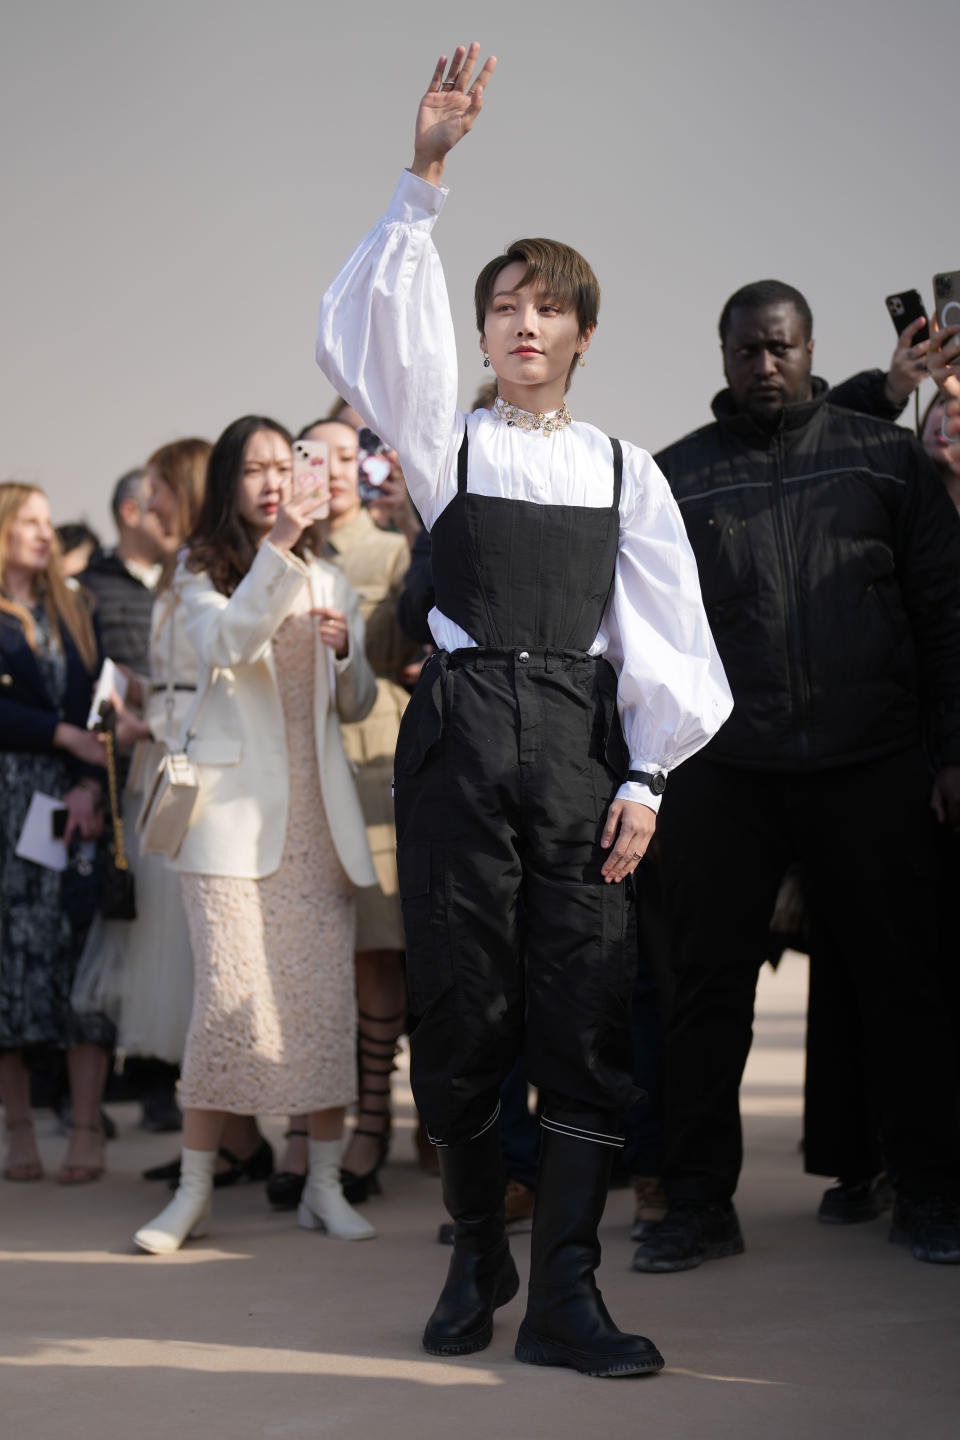 PARIS, FRANCE - FEBRUARY 28: Liu Yuxin wears gold earrings from Dior, a gold large pendant necklace from Dior, a white high neck / puffy sleeves shirt, a black corset tank-top from Dior, a black watch, black puffy pants, black shiny leather knees boots from Dior , outside Dior, during Paris Fashion Week - Womenswear Fall Winter 2023 2024, on February 28, 2023 in Paris, France. (Photo by Edward Berthelot/Getty Images)